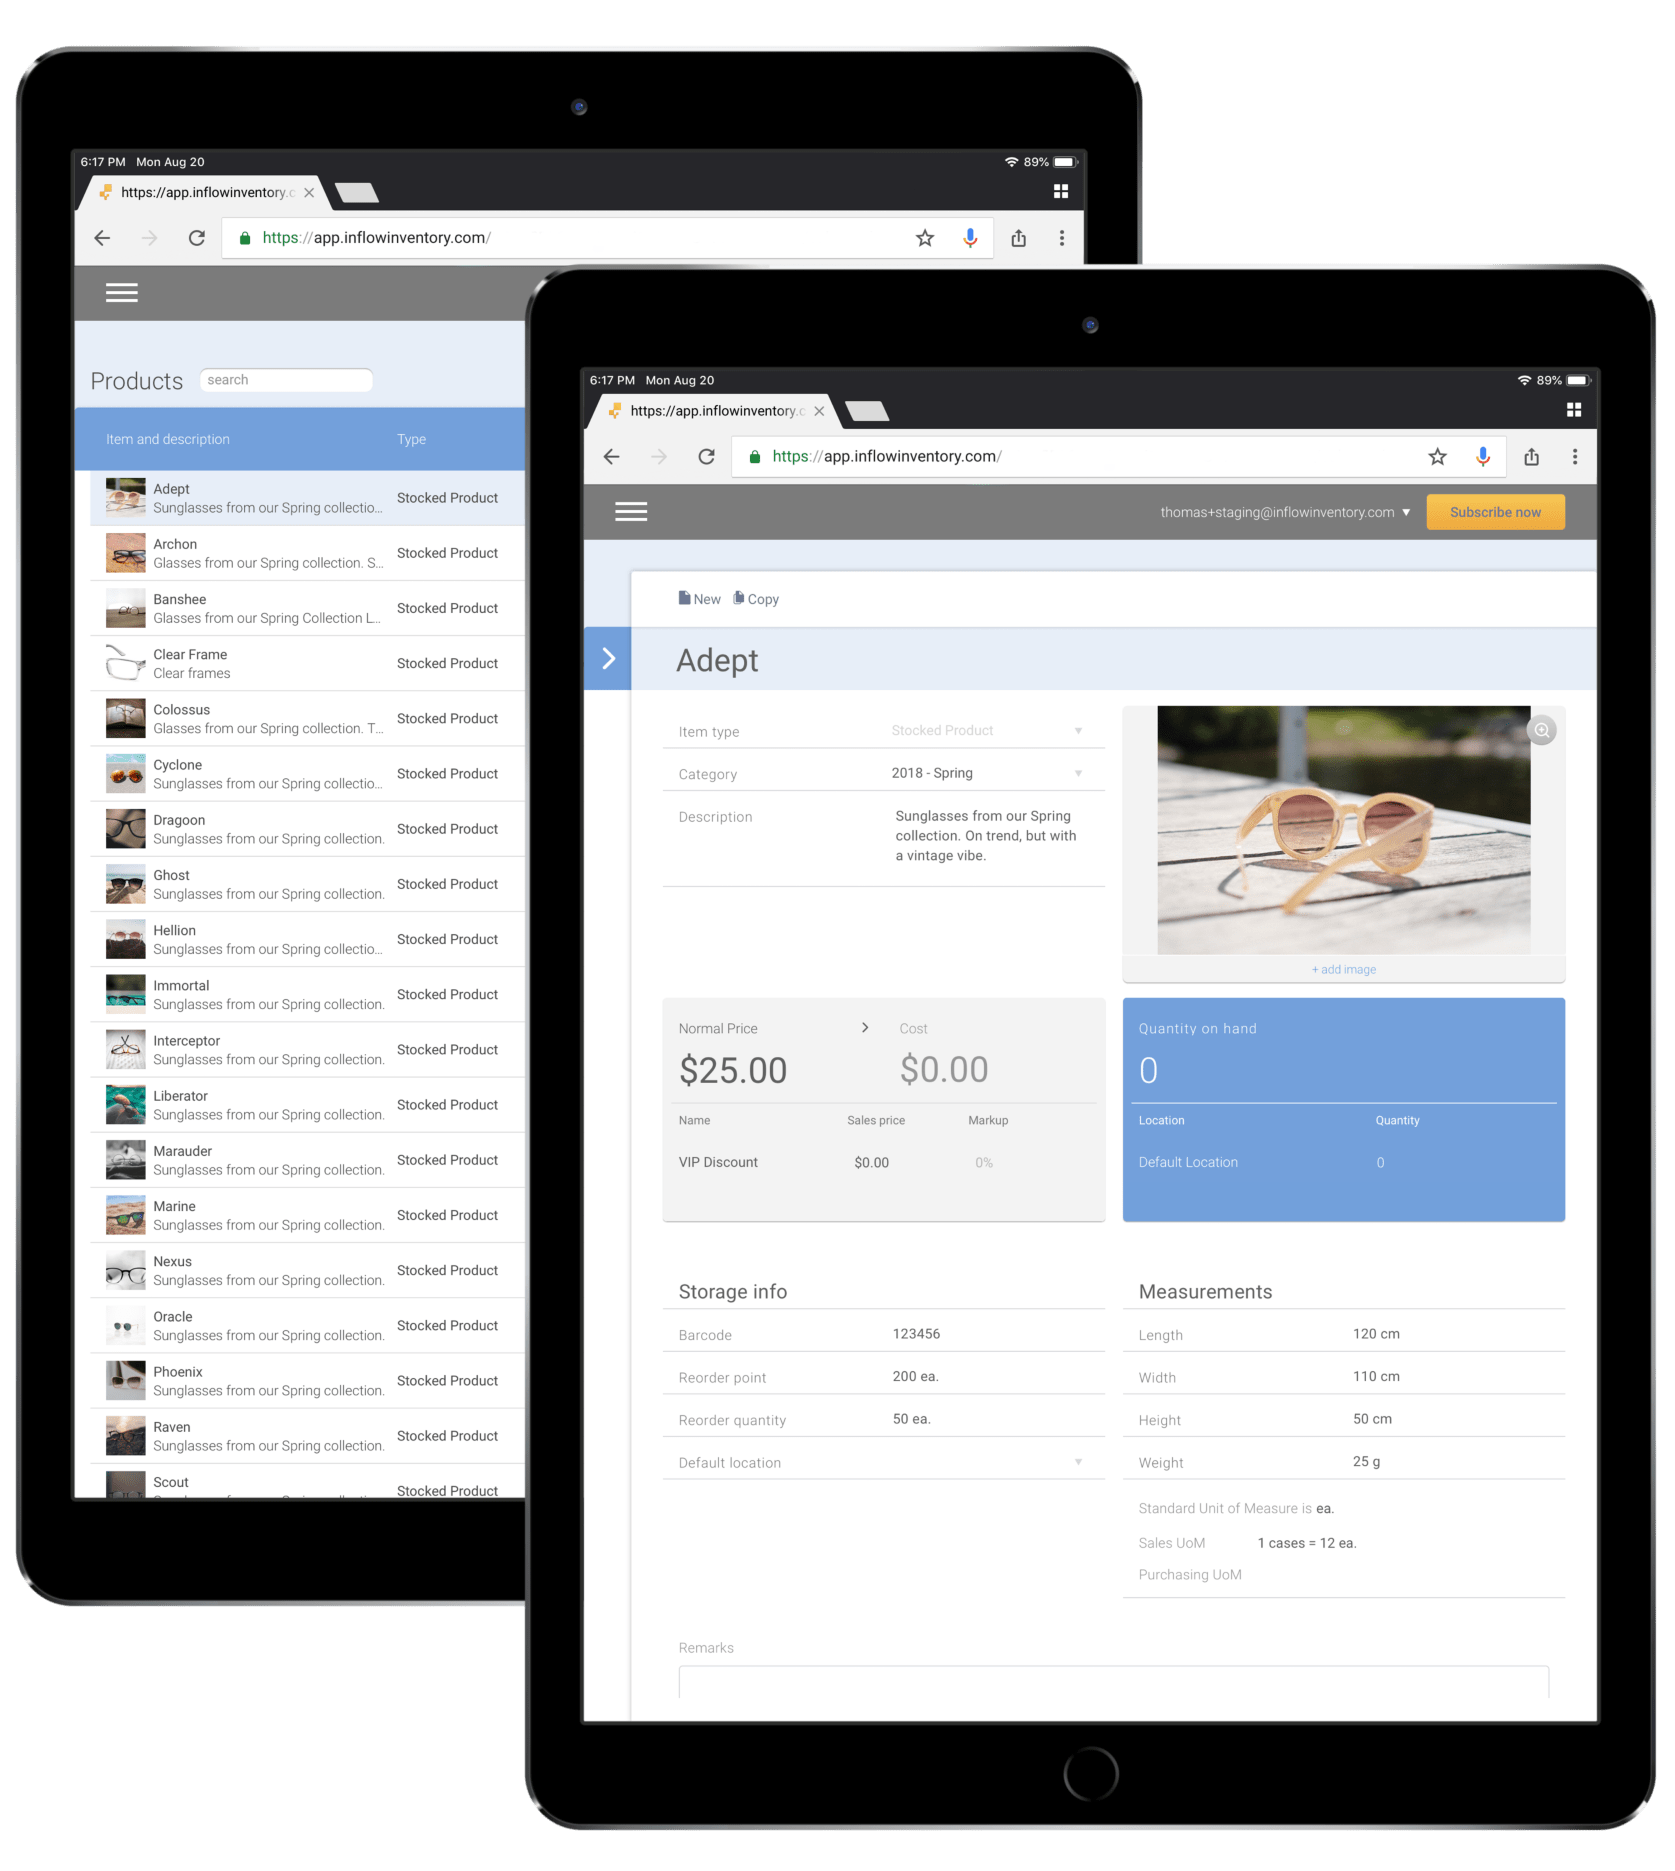 inFlow Cloud’s web app now works better on tablets